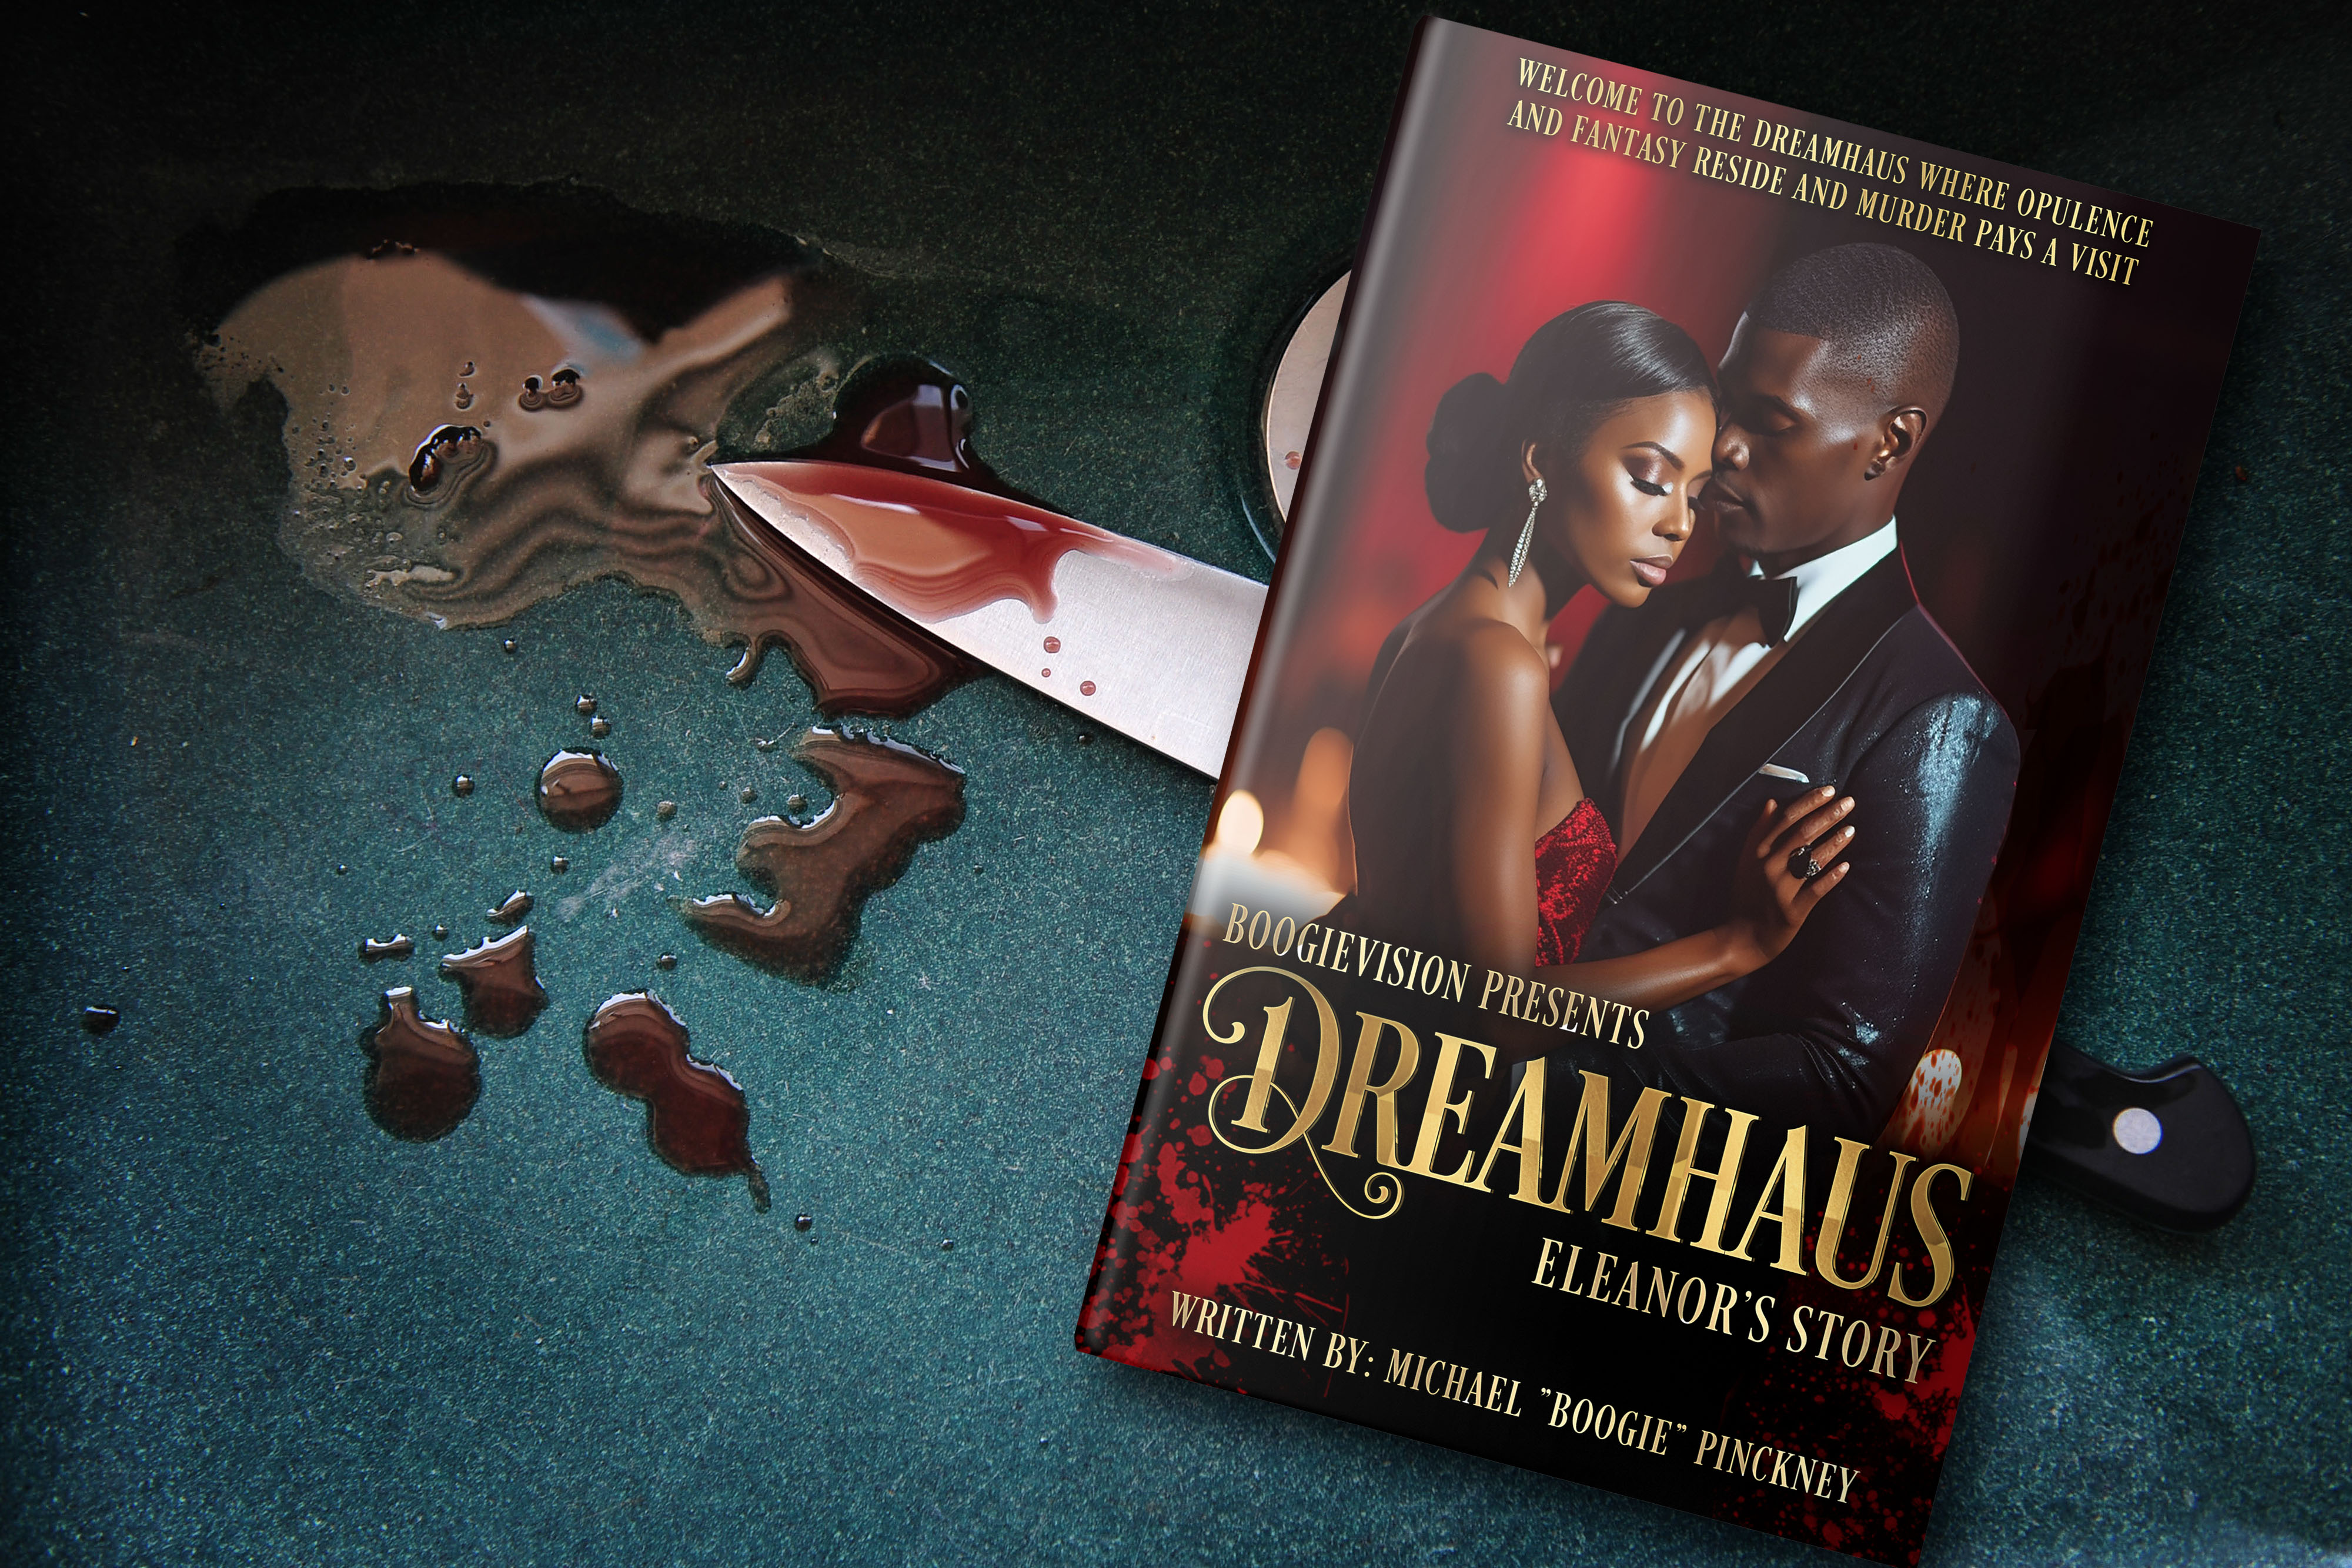 New Book "Dreamhaus" by Award Winning Director Michael "Boogie" Pinckney is a Gripping Psychological Thriller That Delves Into the World of Multiple Personality Disorder